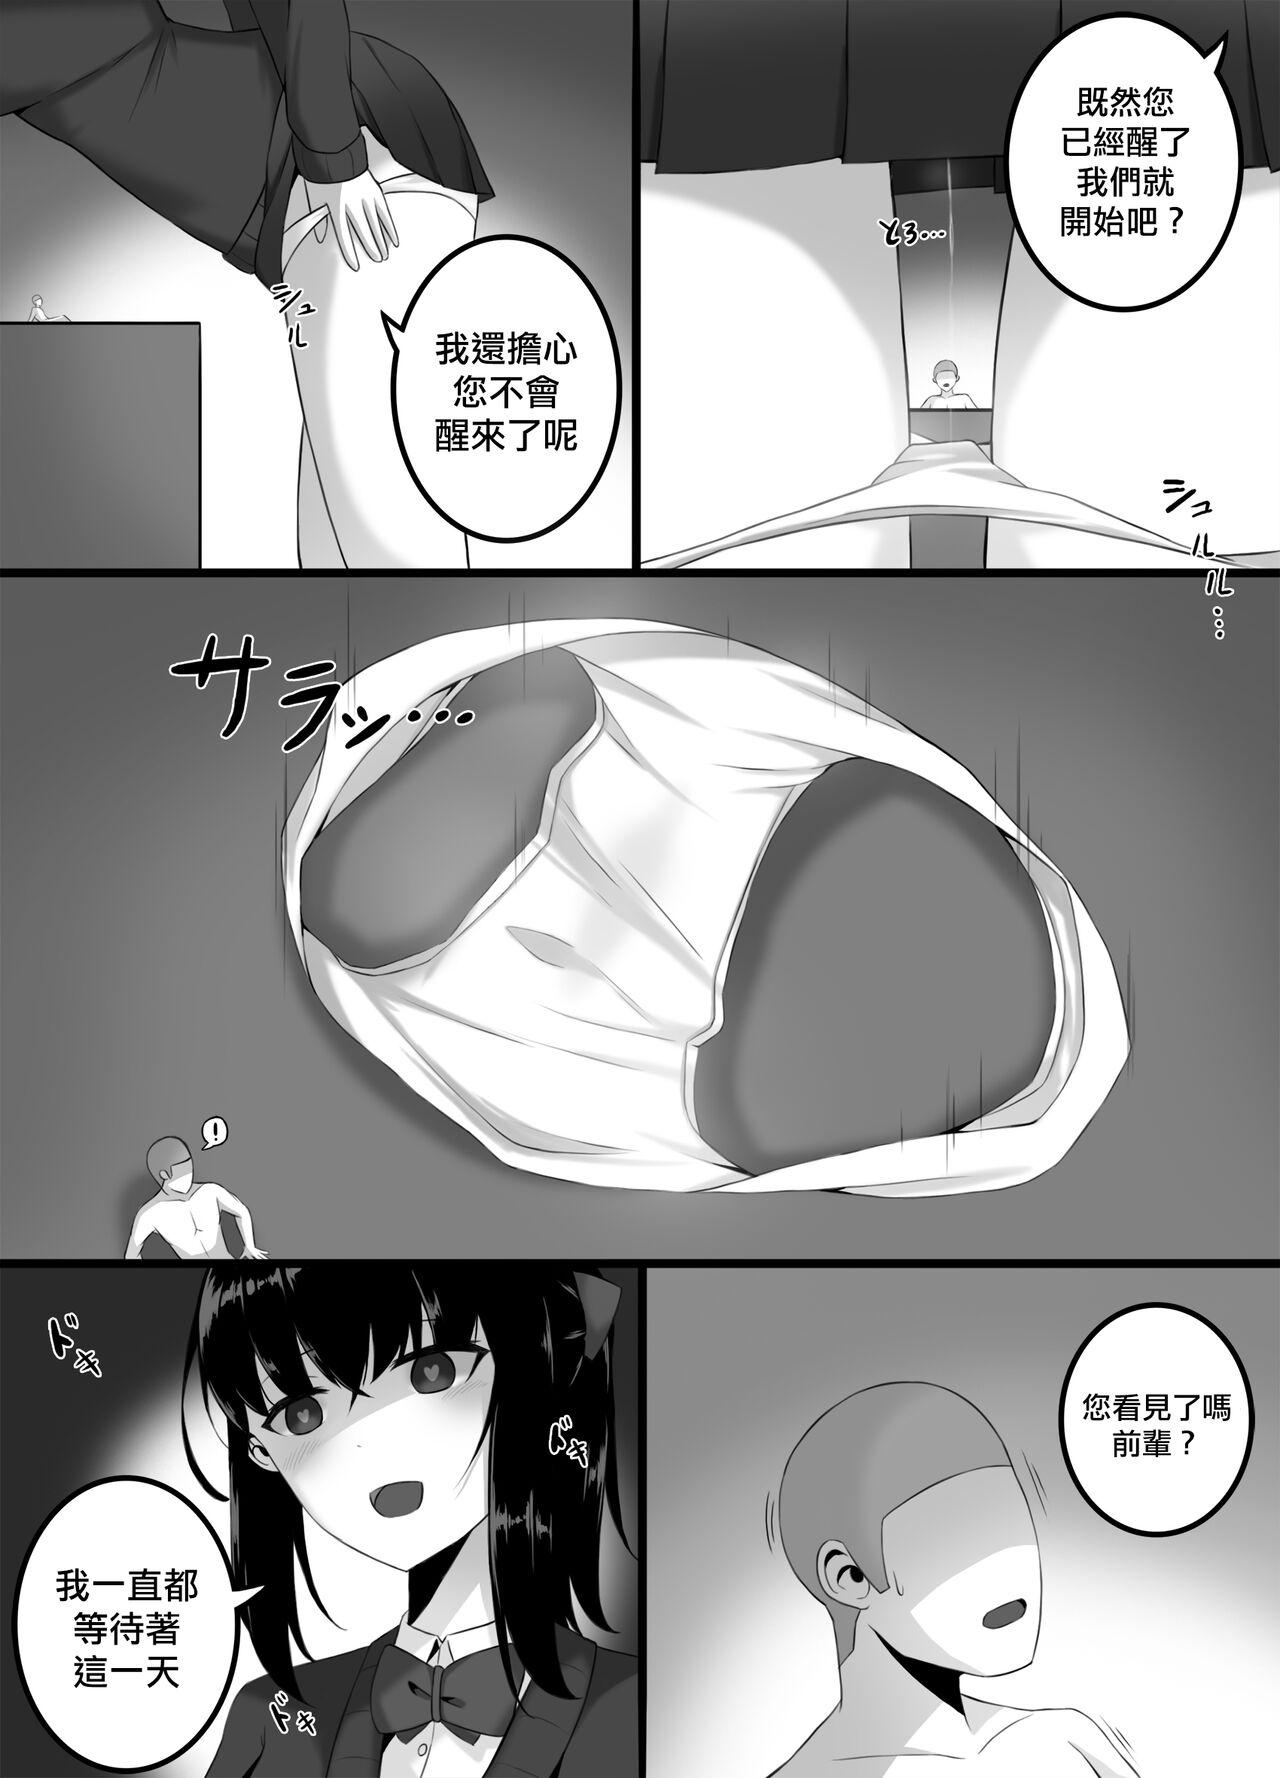 Mature Yandere girl Thailand - Page 5